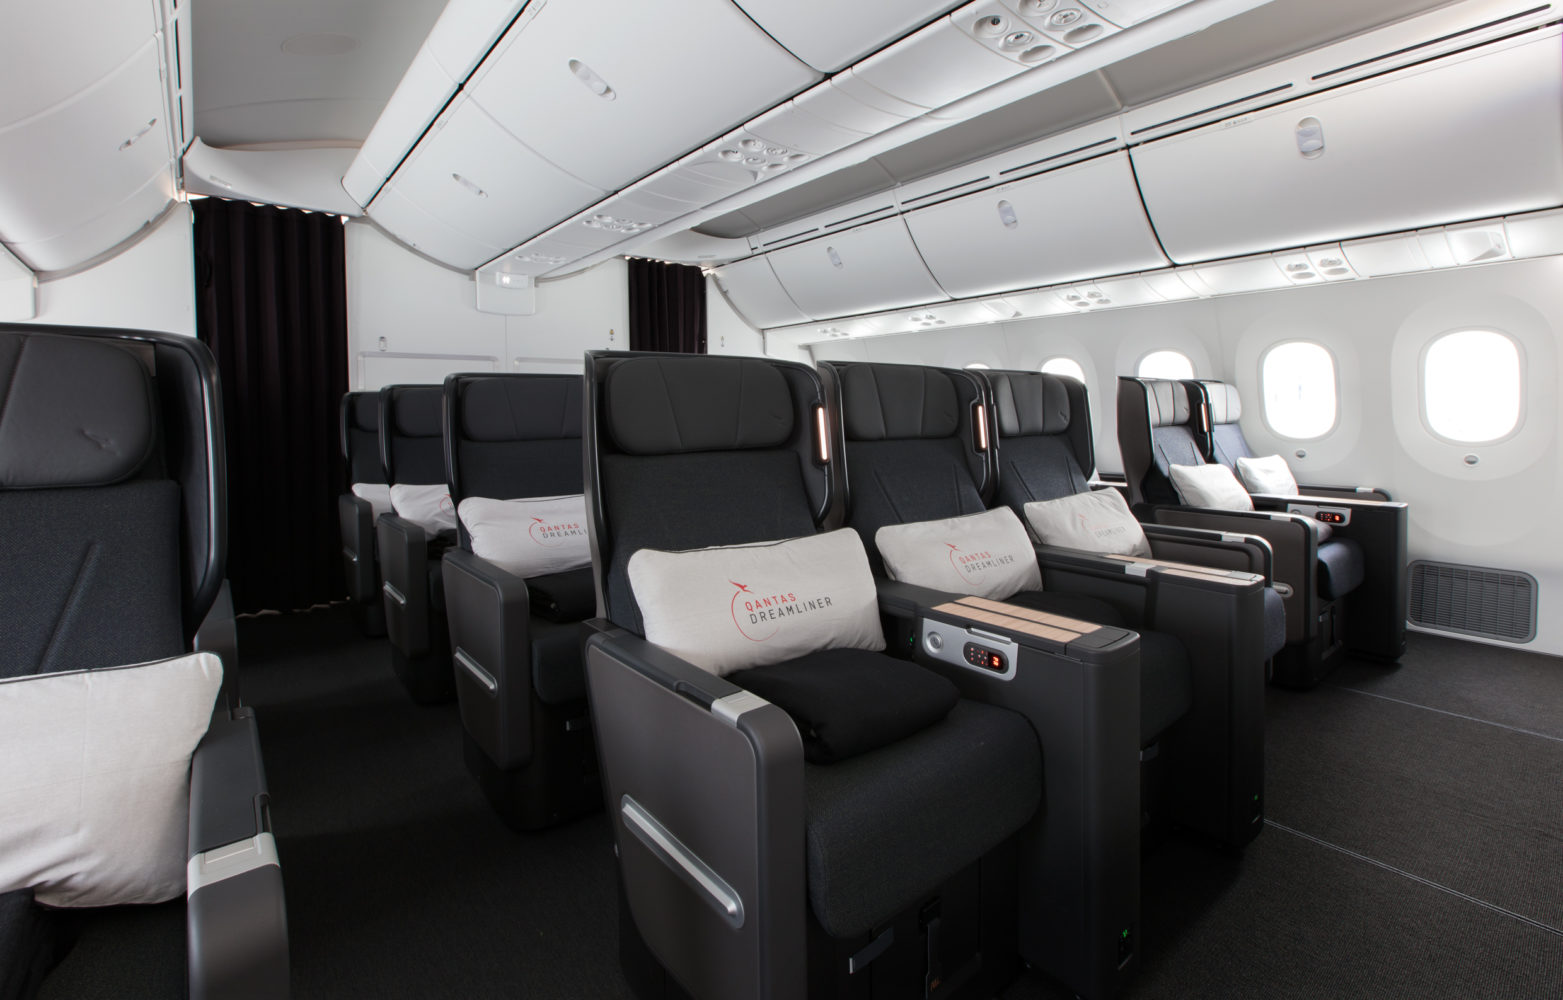 Qantas outlines what passengers really want inside aircraft